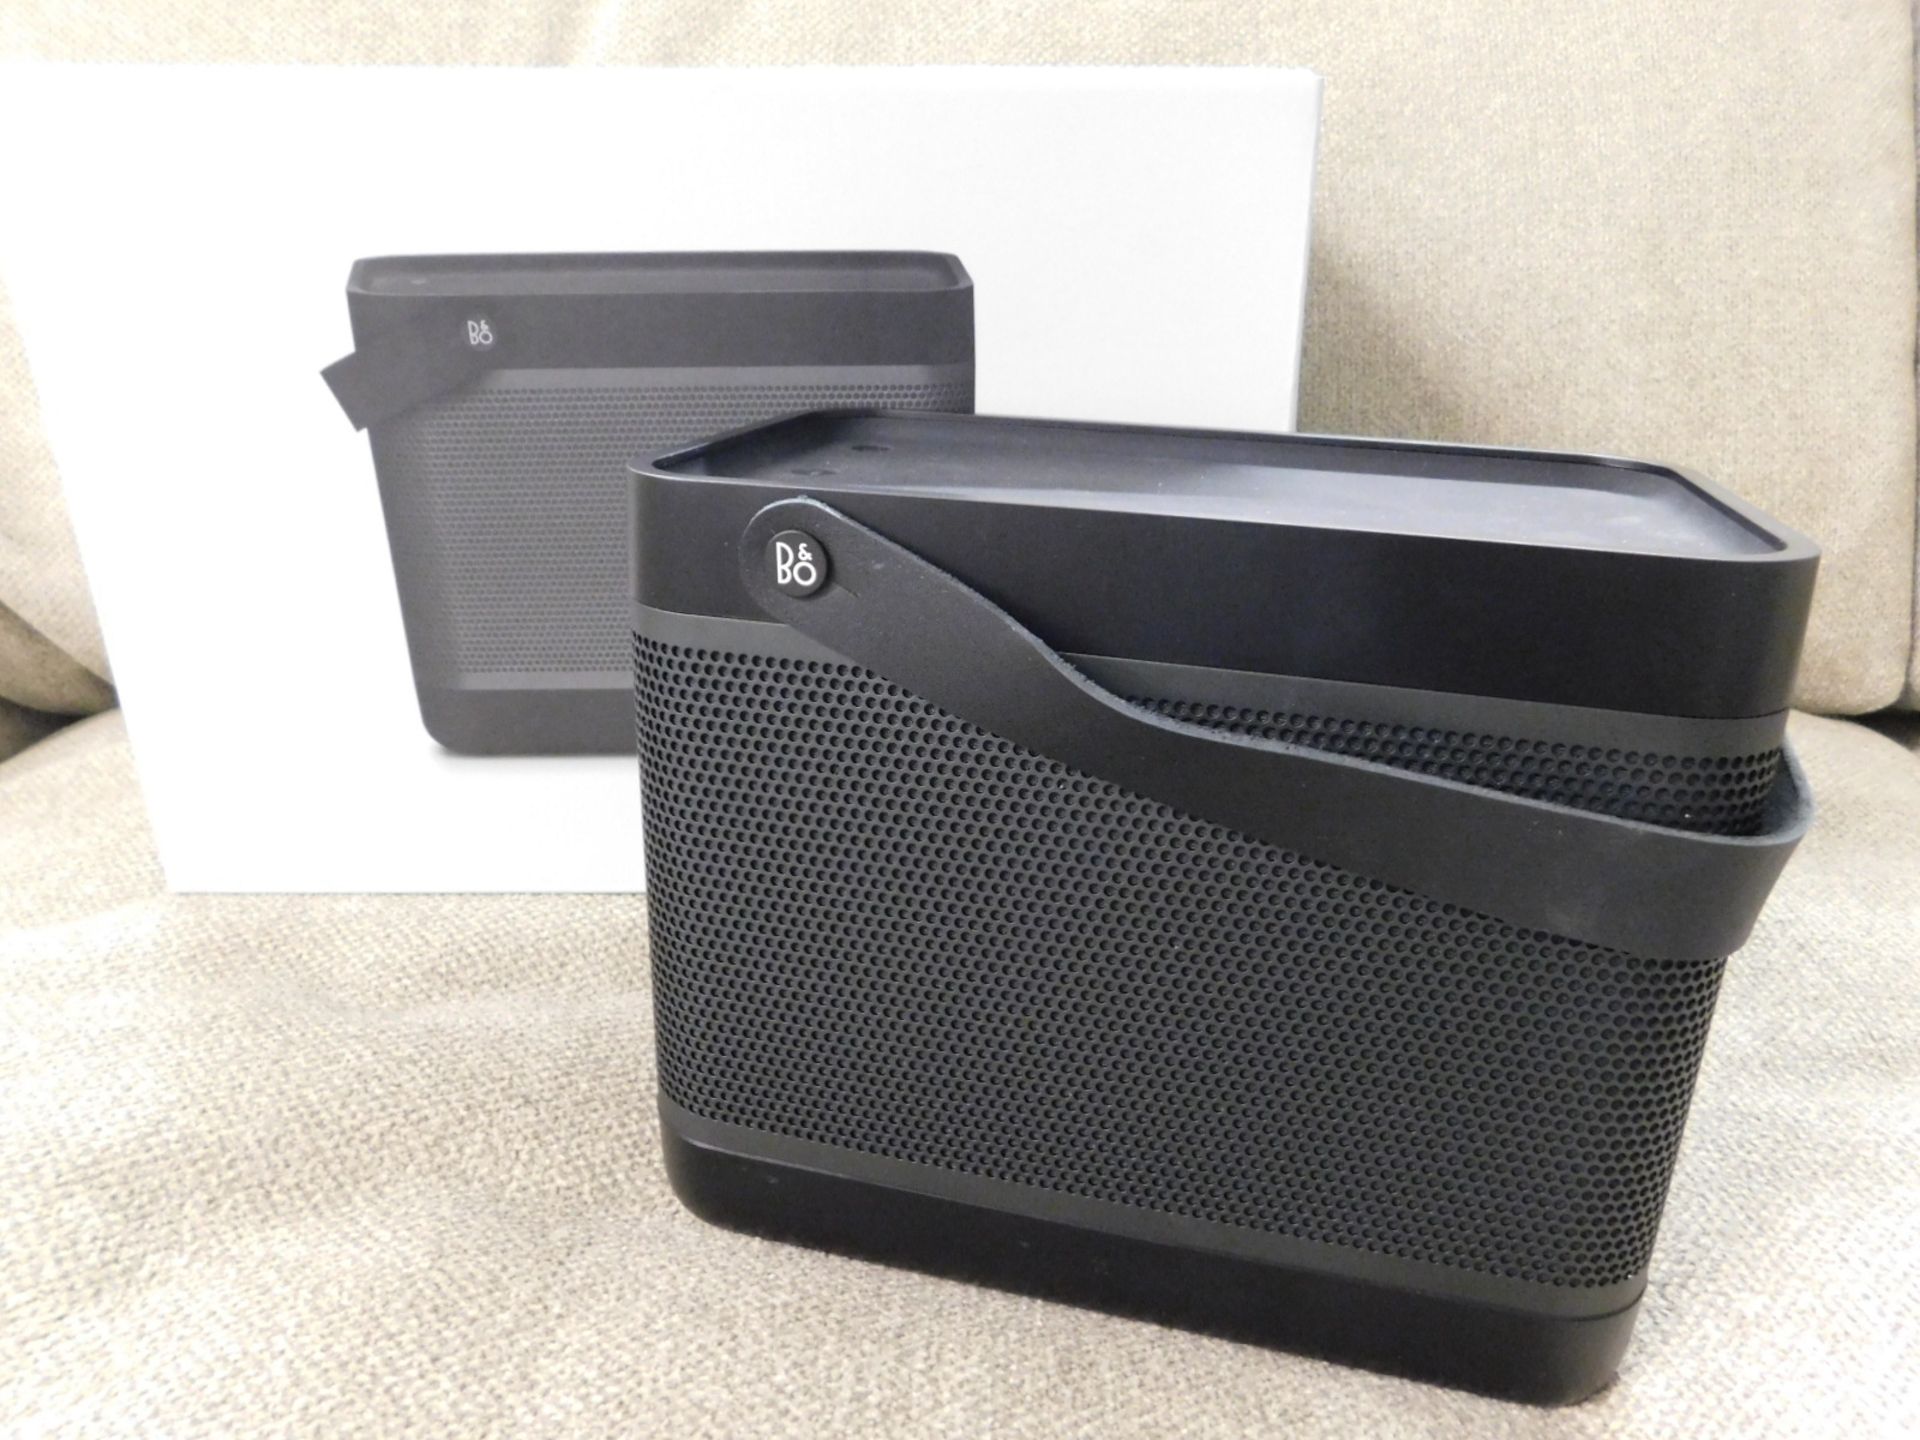 1 BOXED BANG AND OLUFSEN BEOLIT15 BLUETOOTH SPEAKER IN BLACK RRP £449 (POWER ON/WORKING)